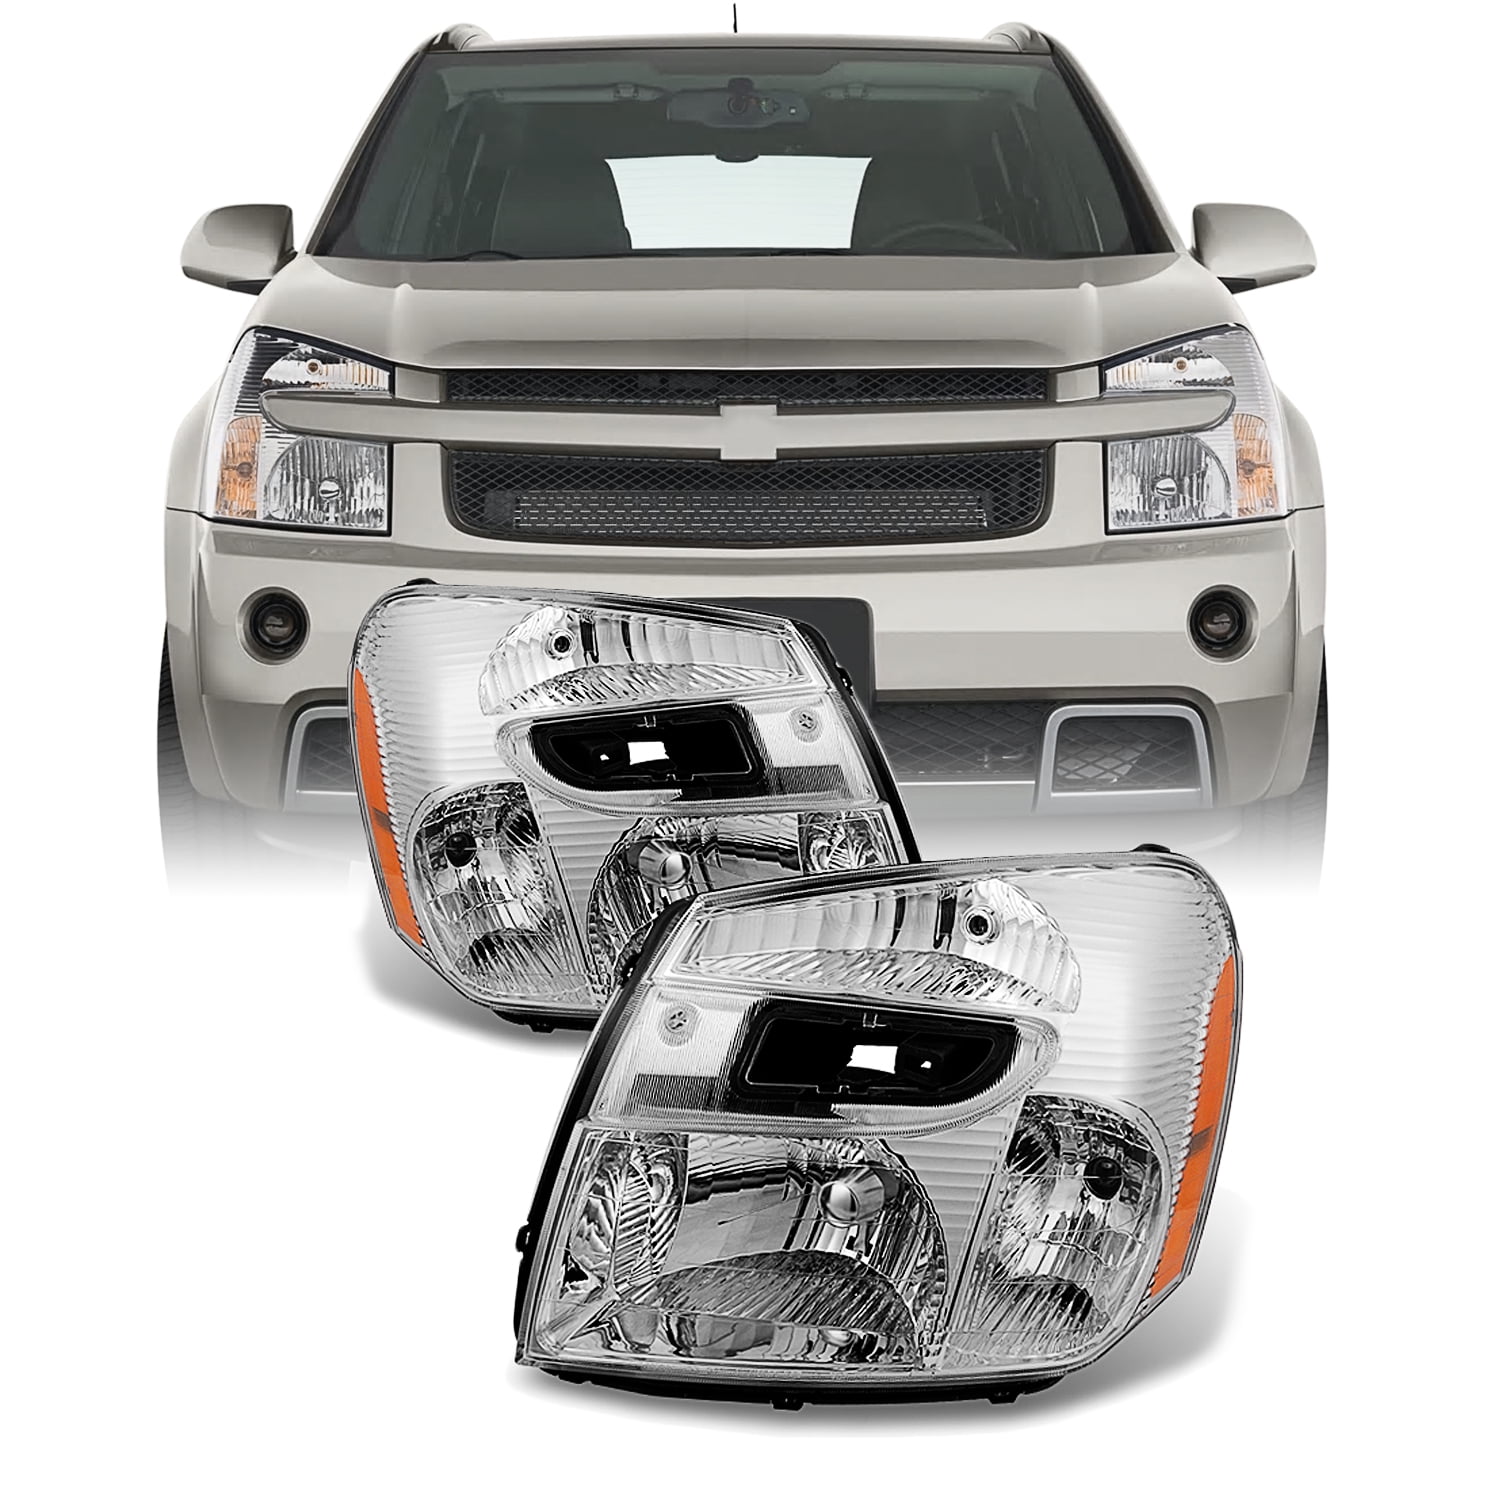 LABLT Headlights Replacement for 2005 2006 2007 2008 2009 Chevy Equinox Headlights Pair Left+Right Side Passenger Driver Side 